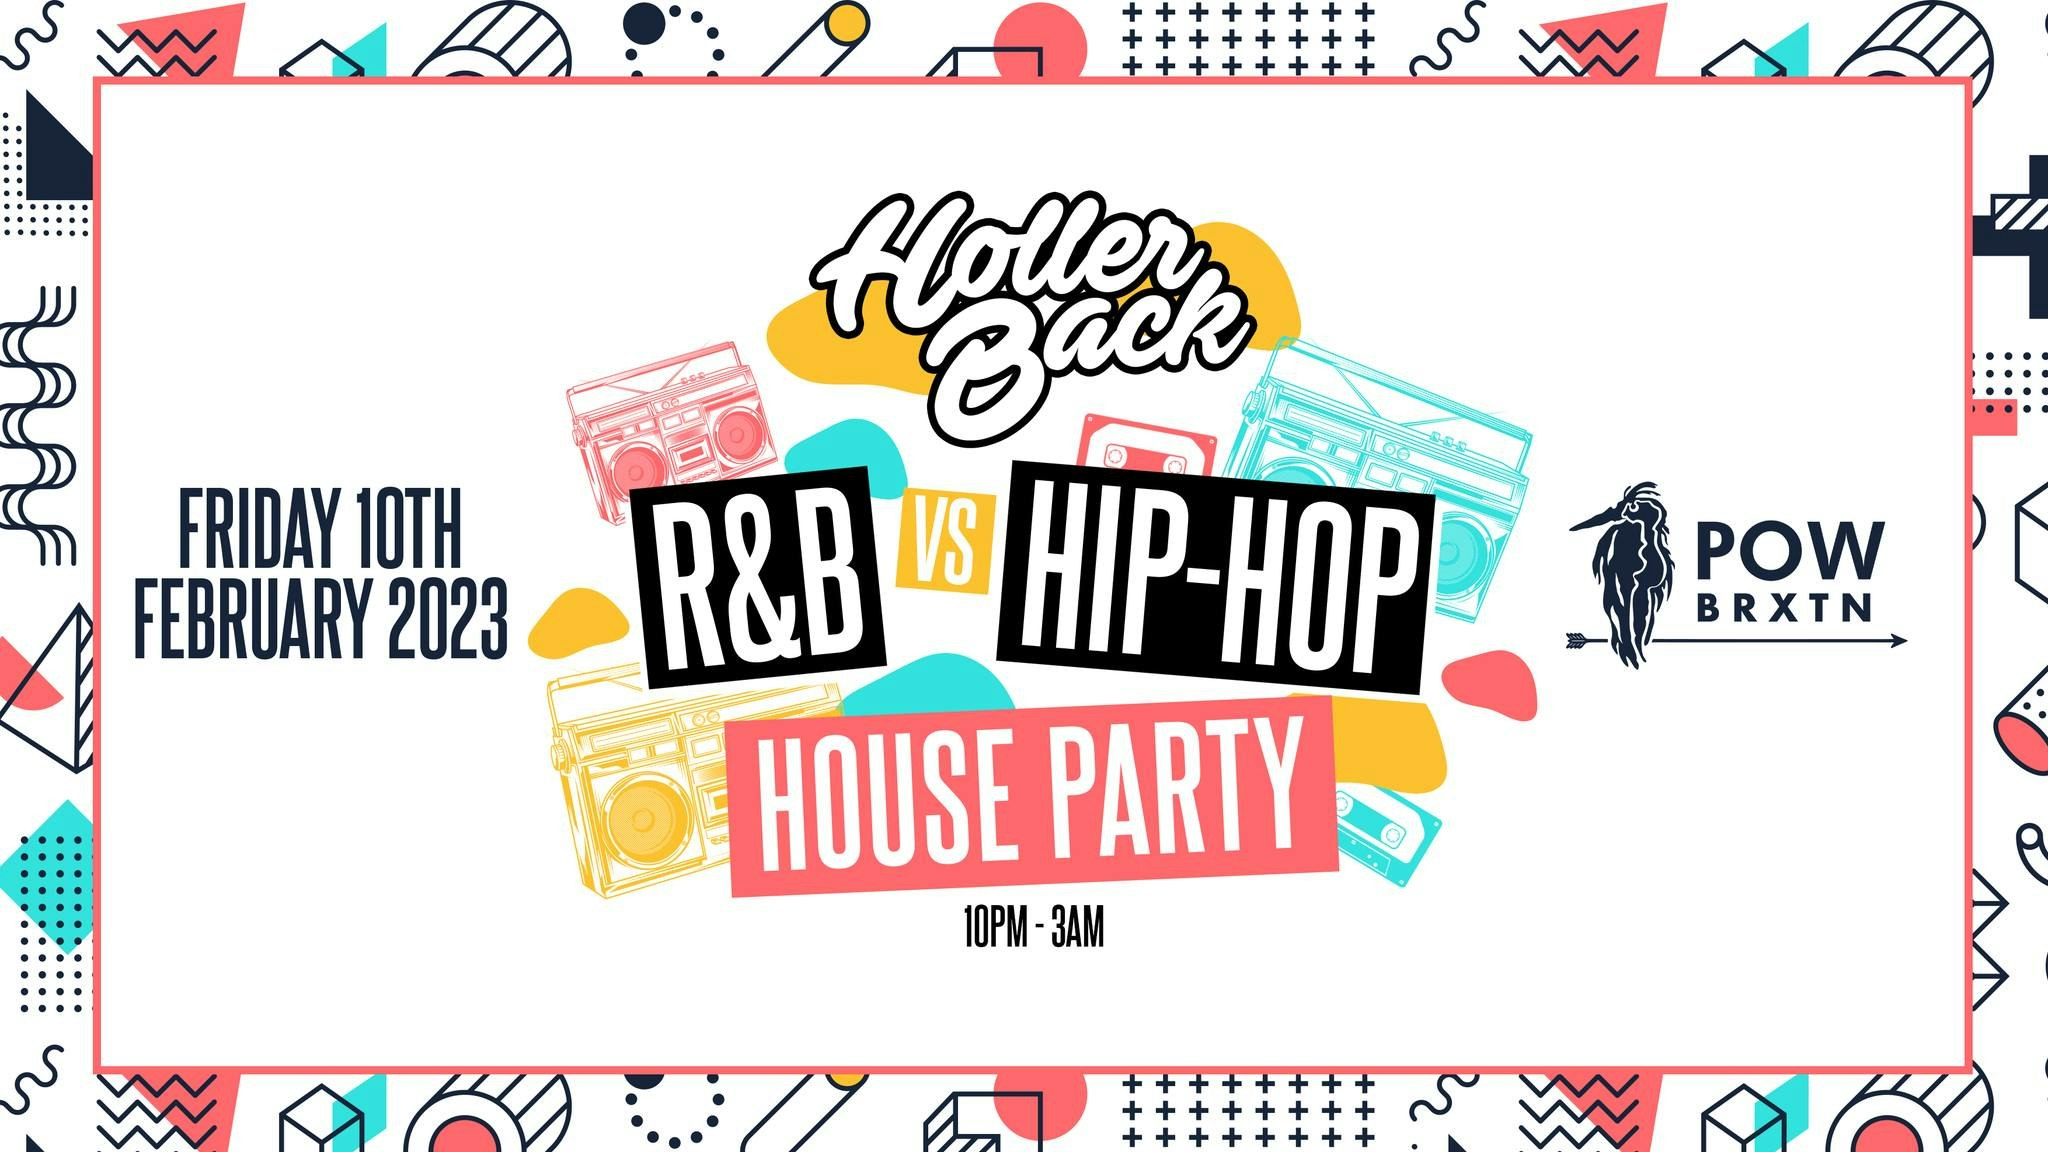 Holler Back – Hiphop Vs RnB House Party at Prince of Wales Brixton | £5 Tickets!